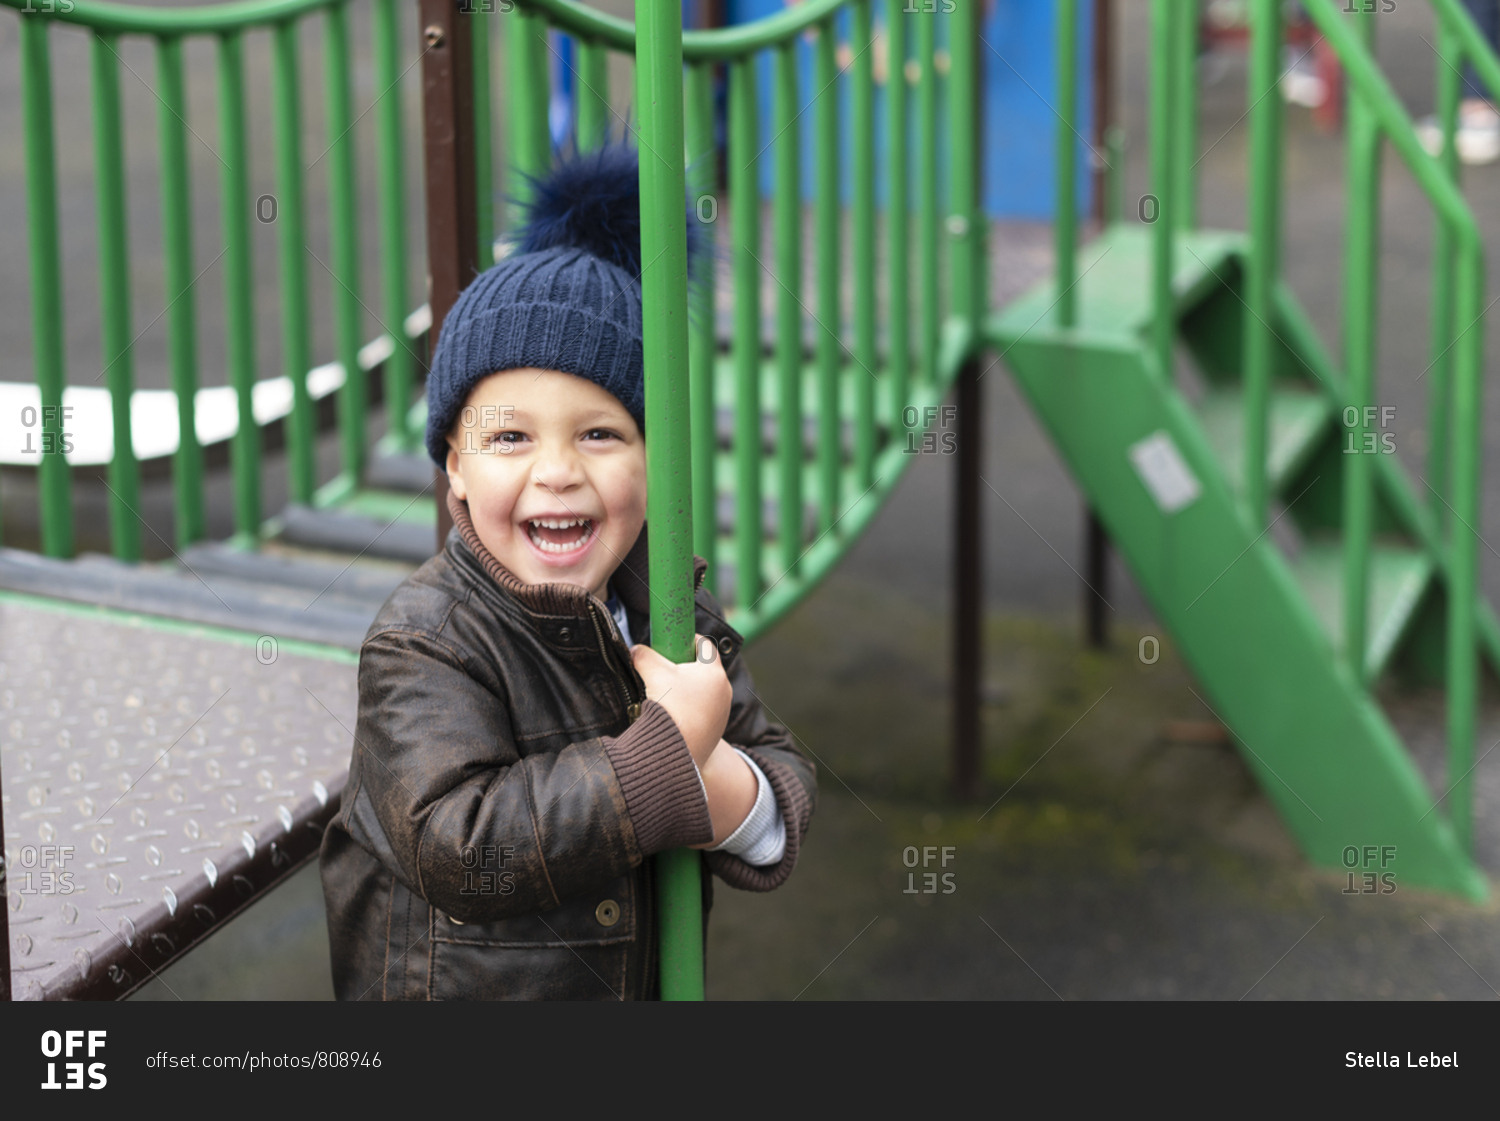 Happy young boy in playground holds fireman's pole